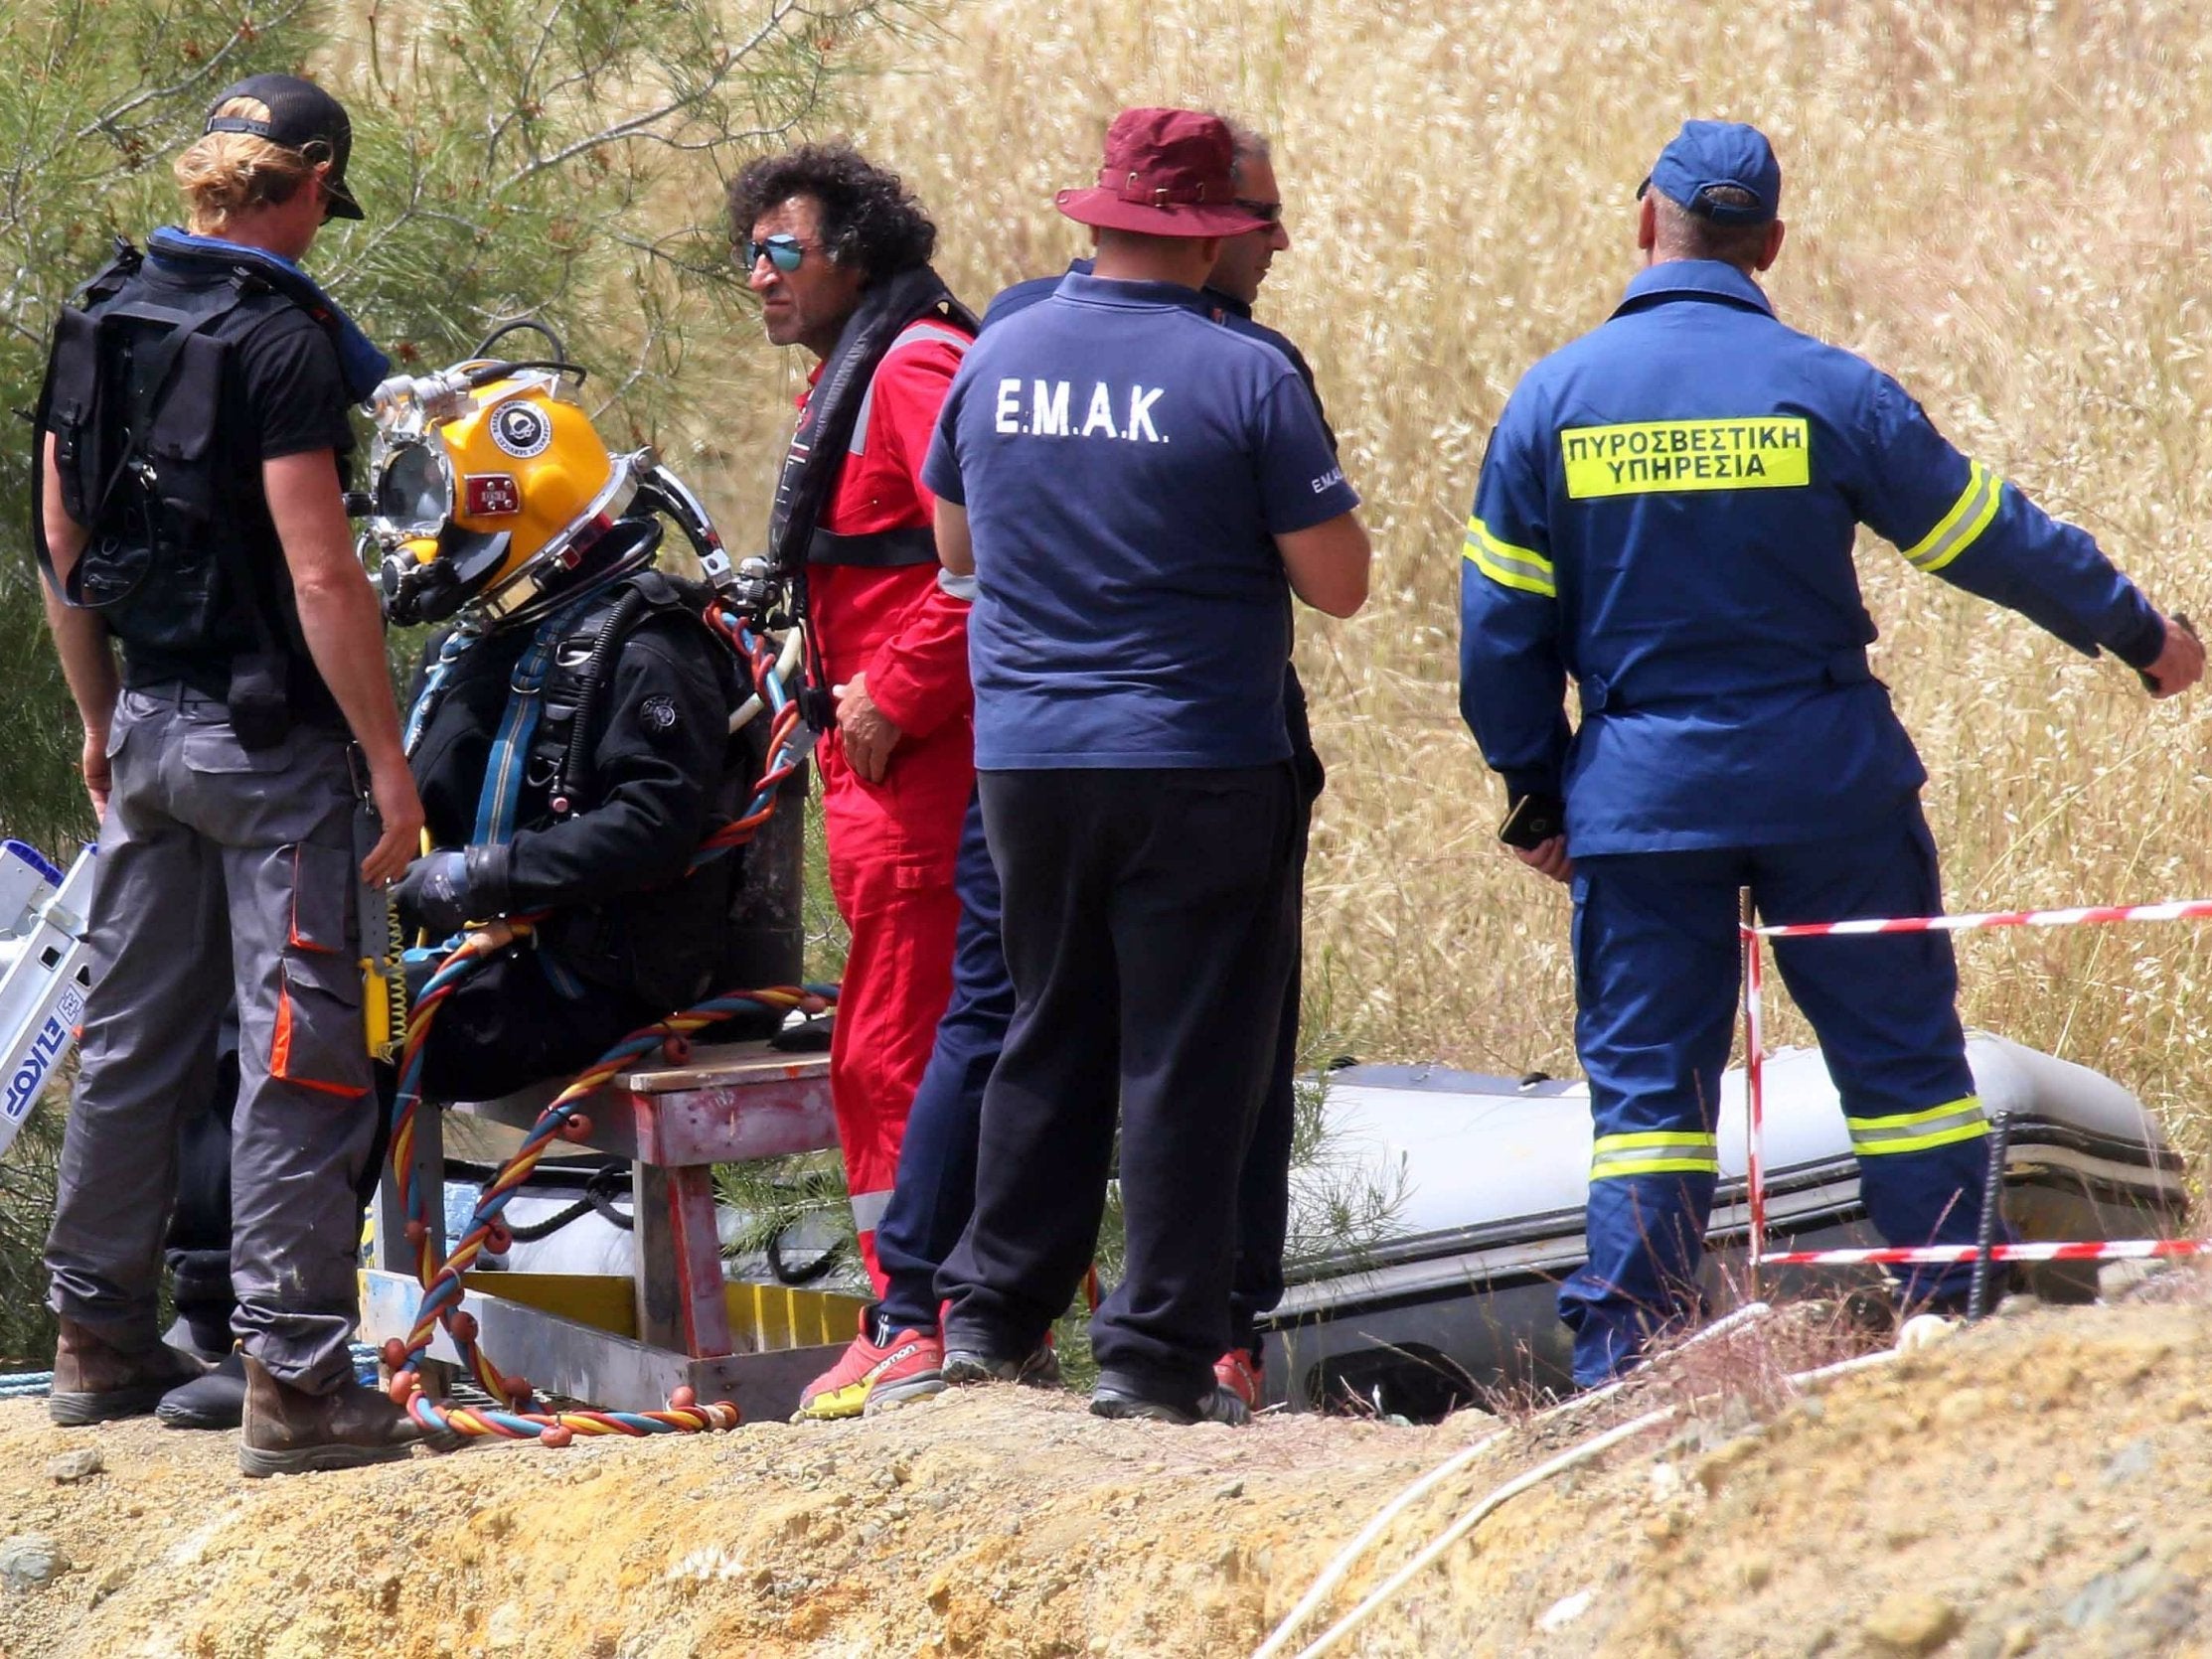 Firefighters and investigators search a lake near the village of Xiliato for the remains of more victims outside Nicosia, Cyprus, 26 April 2019.